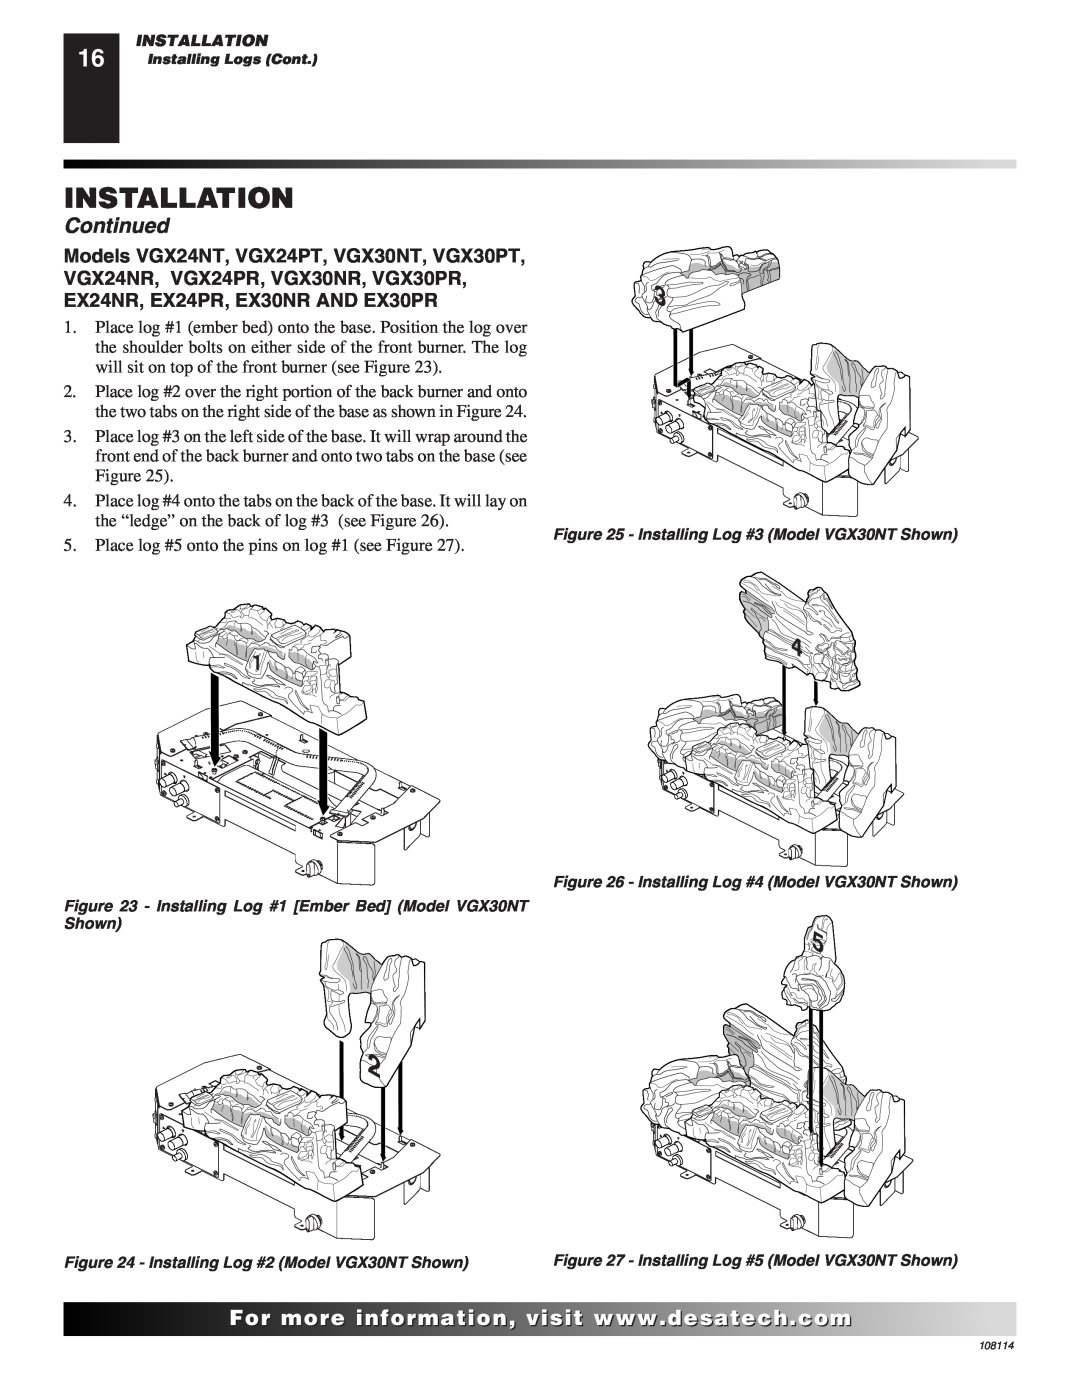 Desa INTERNATIONAL UNVENTED (VENT-FREE) GAS LOG HEATER installation manual Installation, Continued 